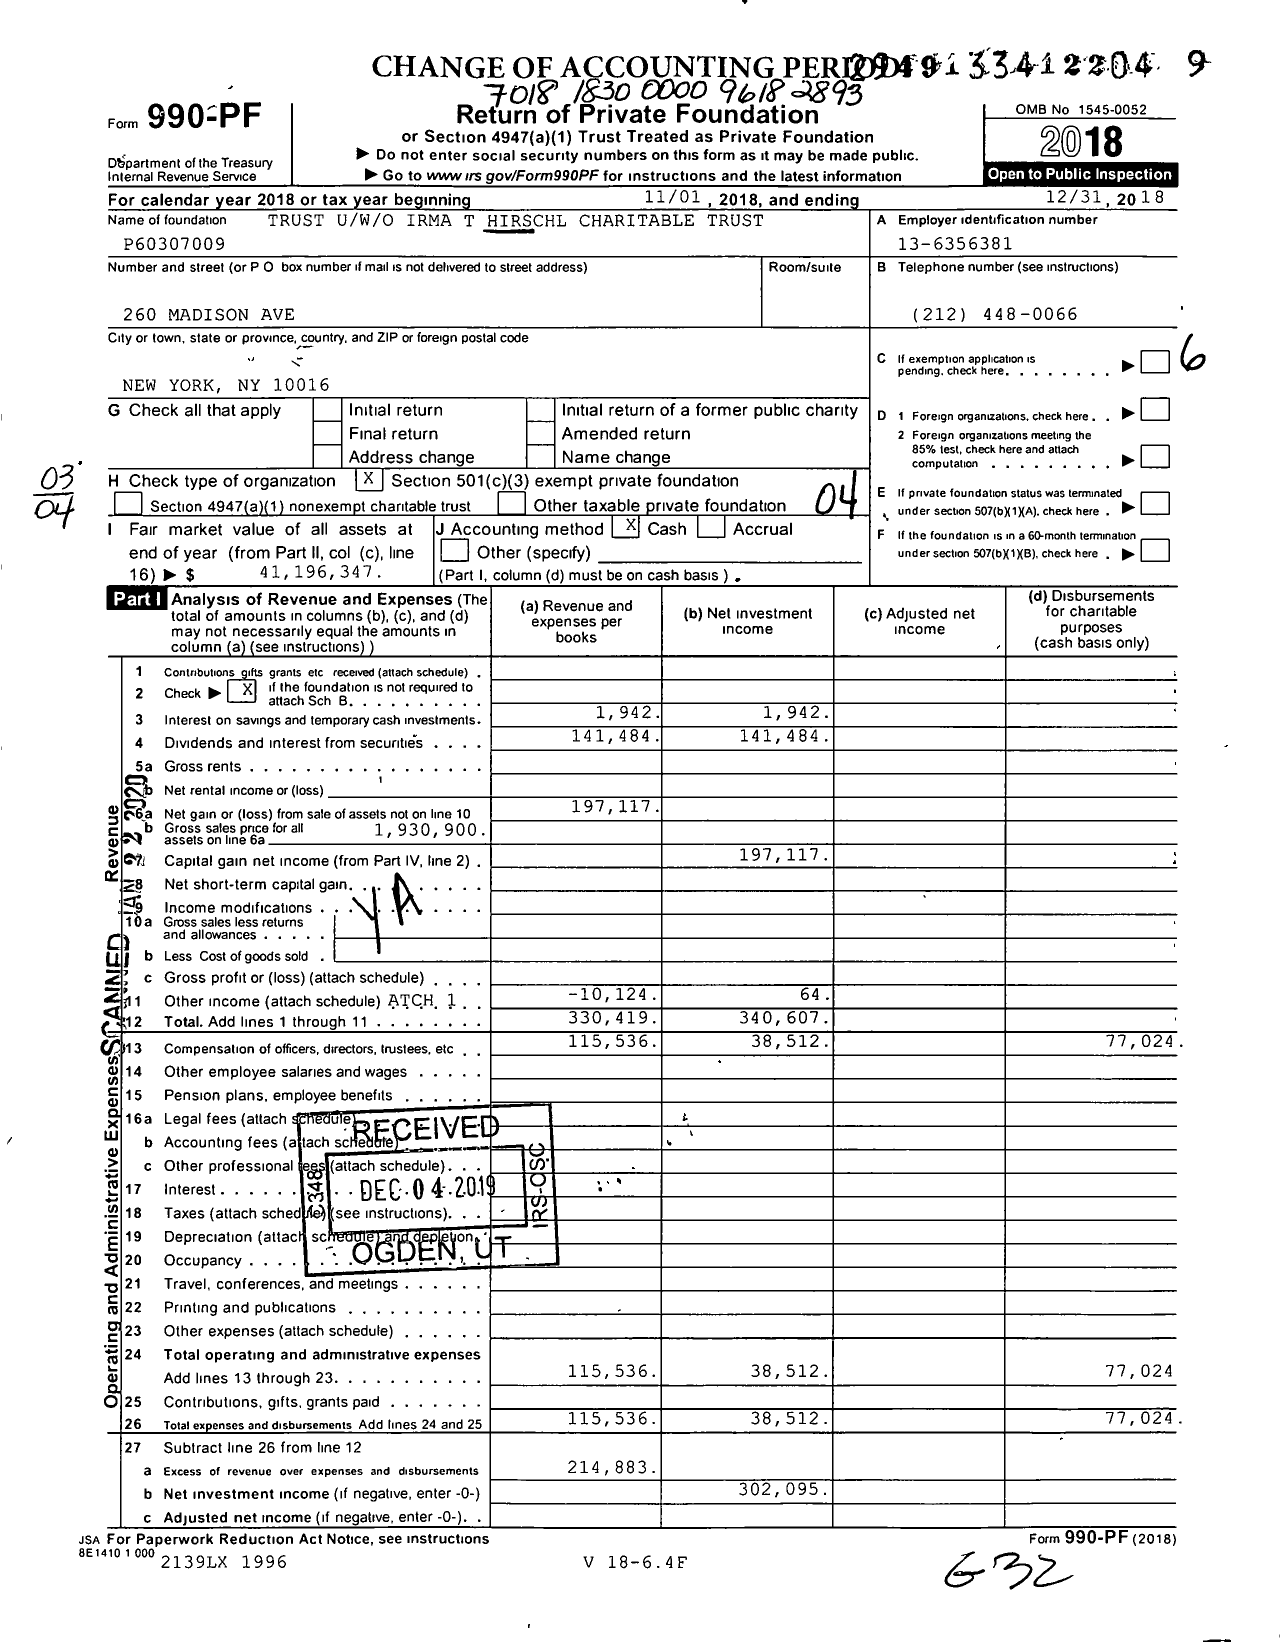 Image of first page of 2018 Form 990PF for Trust Uwo Irma T Hirschl Charitable Trust